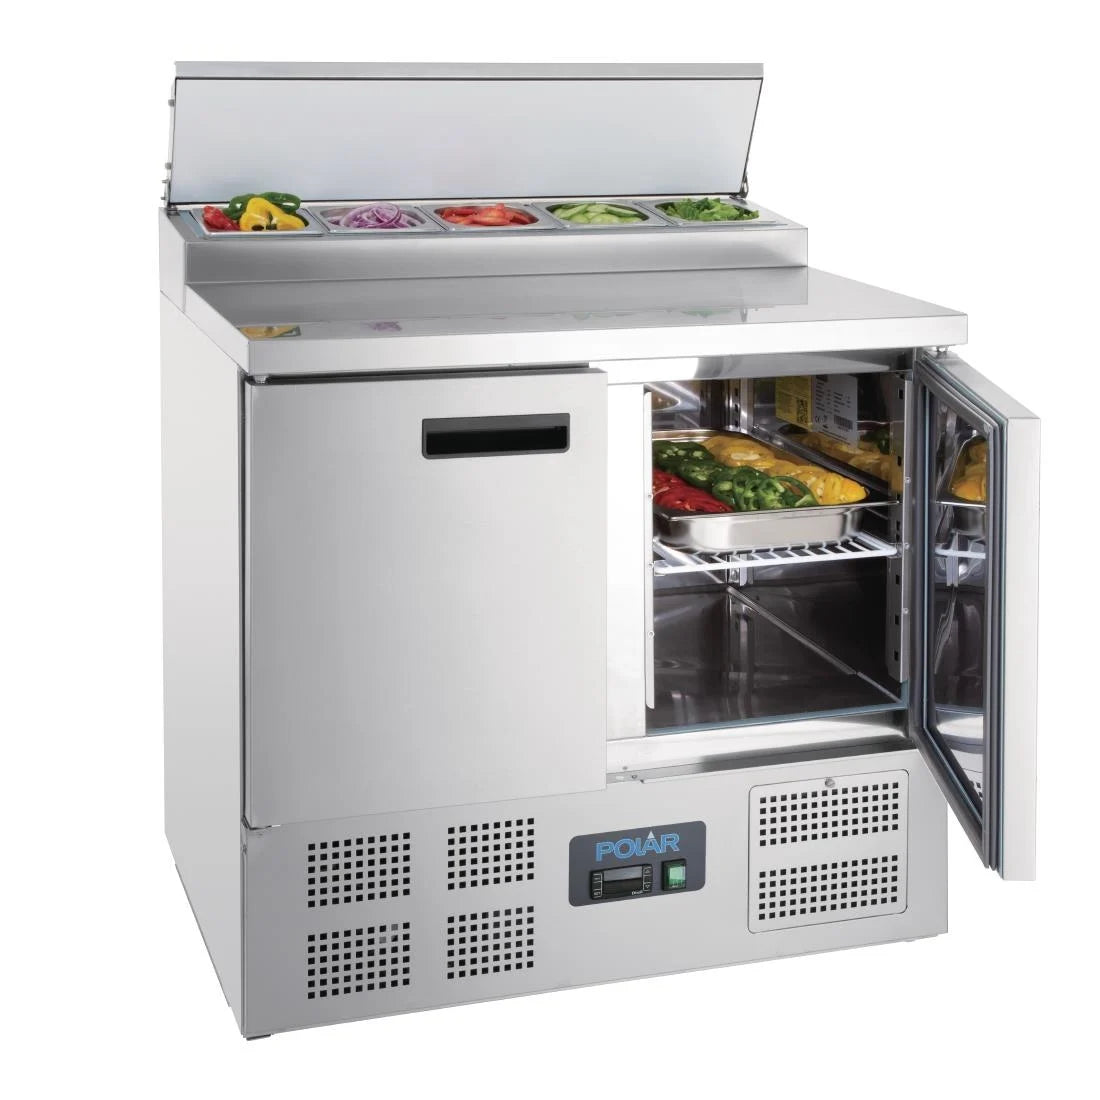 Polar G-Series Pizza Prep Counter Fridge 254Ltr.Product Ref:00588.Model: G604. 🚚 1-3 Days Delivery